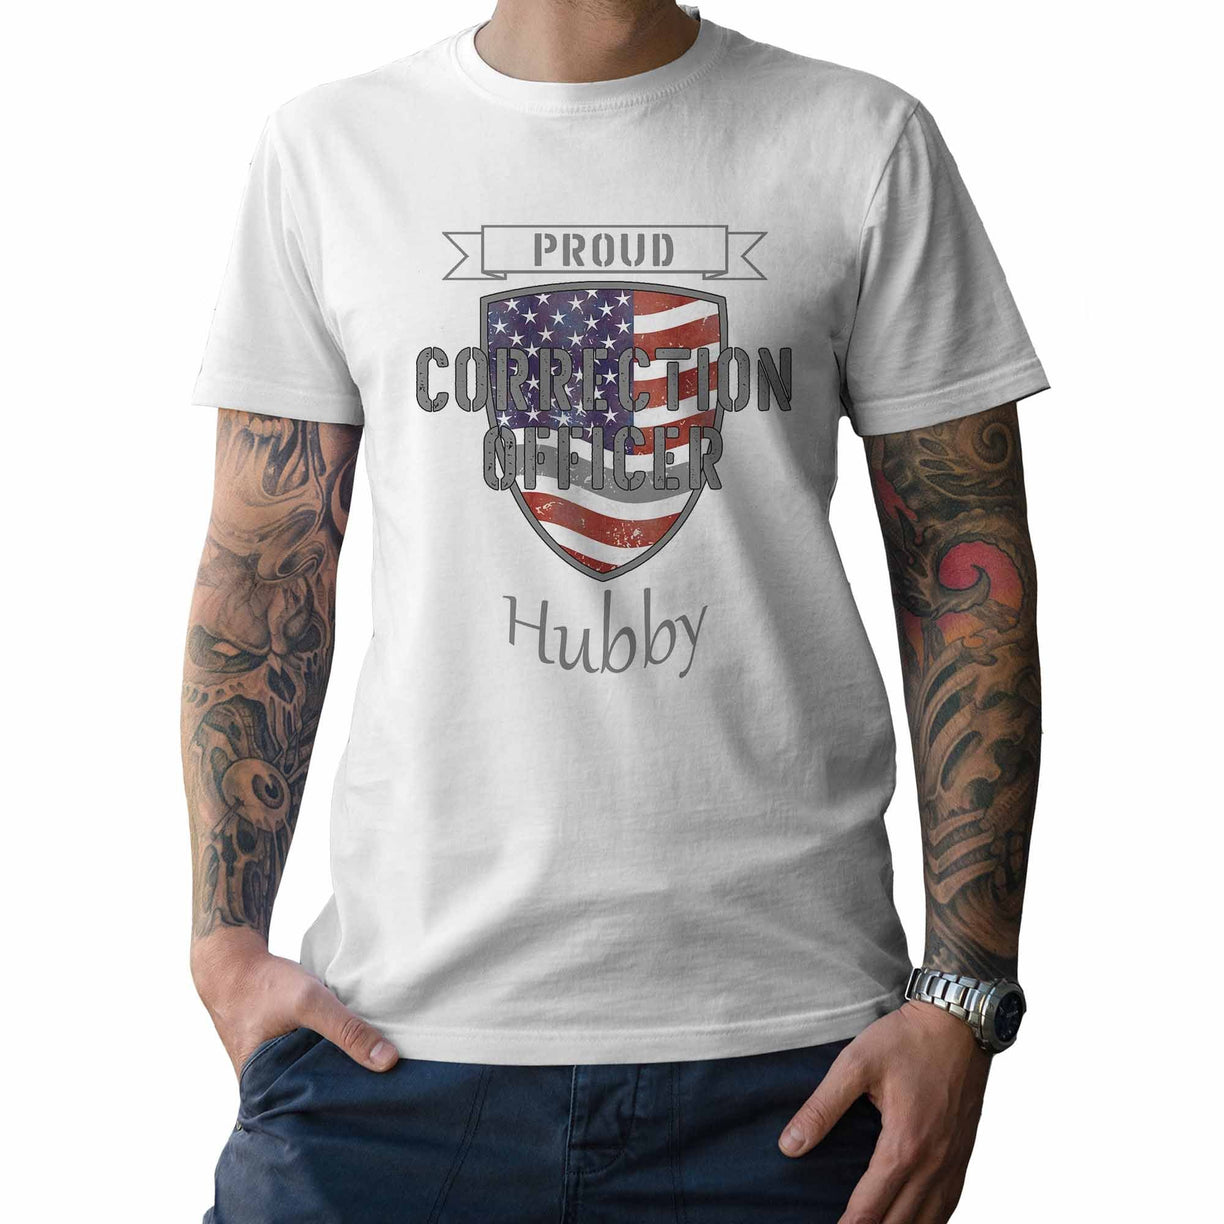 Proud Correction Officer Hubby - My Custom Tee Party